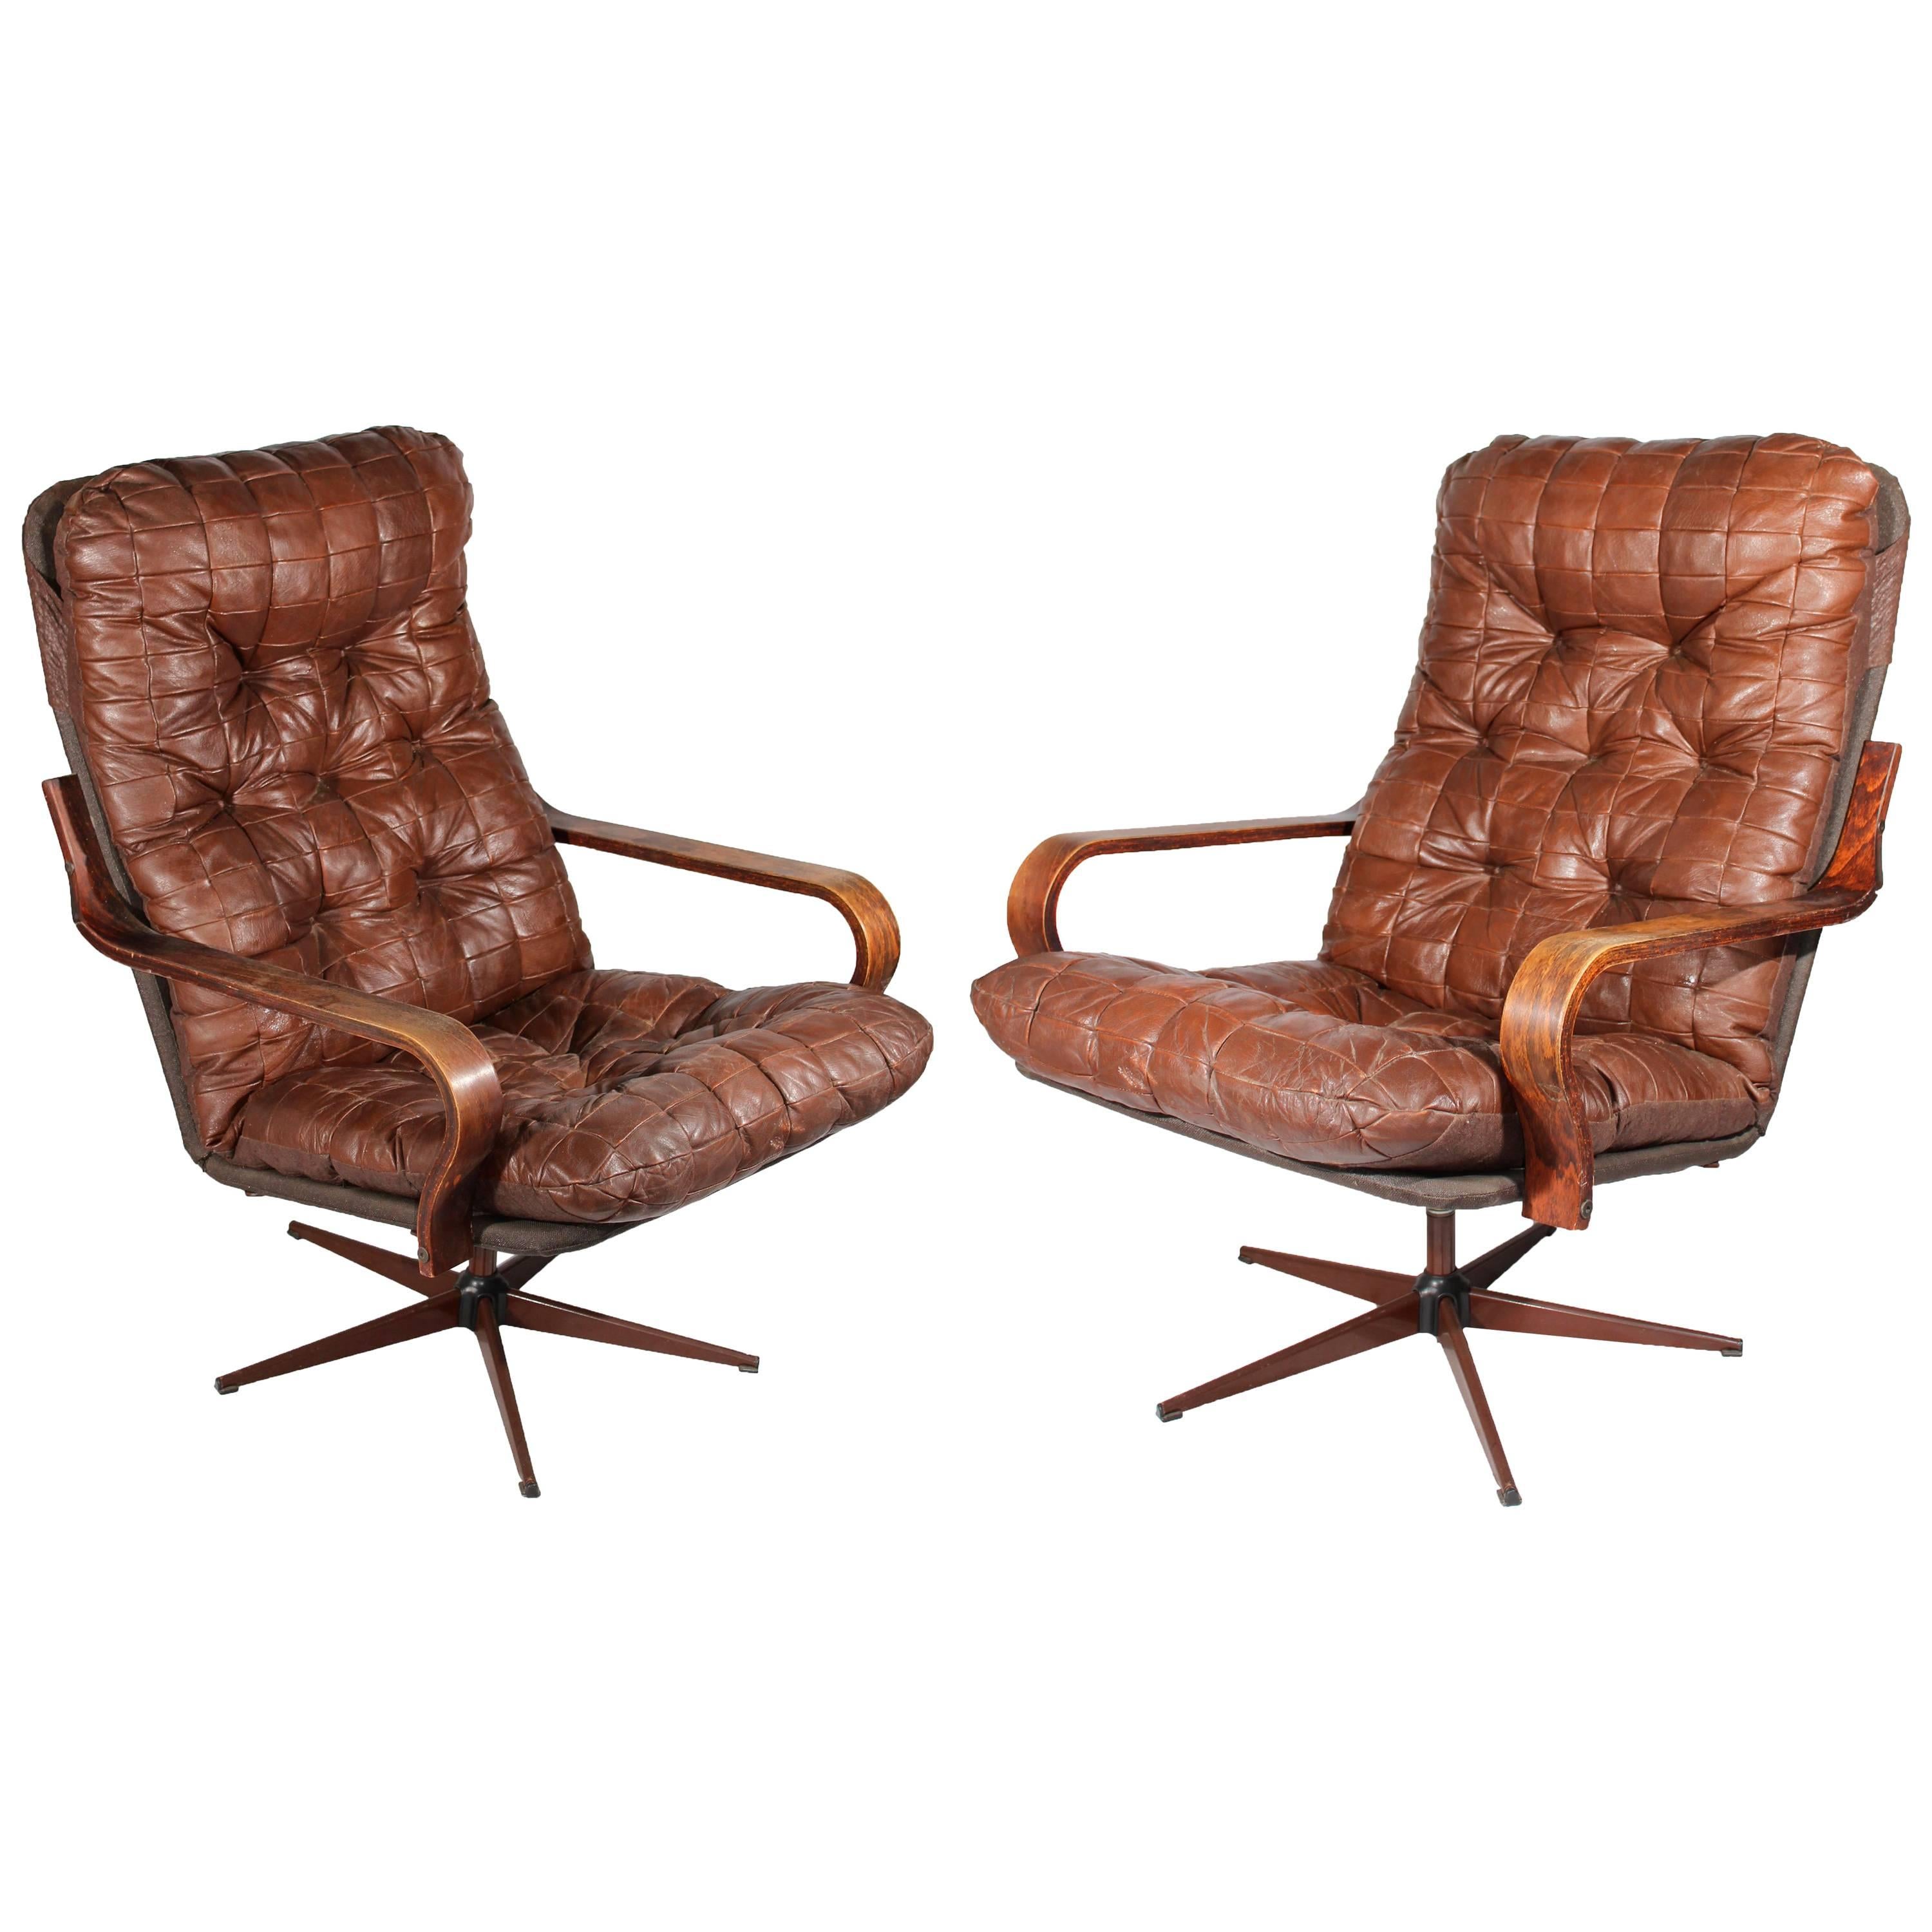 1970s Pair of Leather Swivel Armchairs